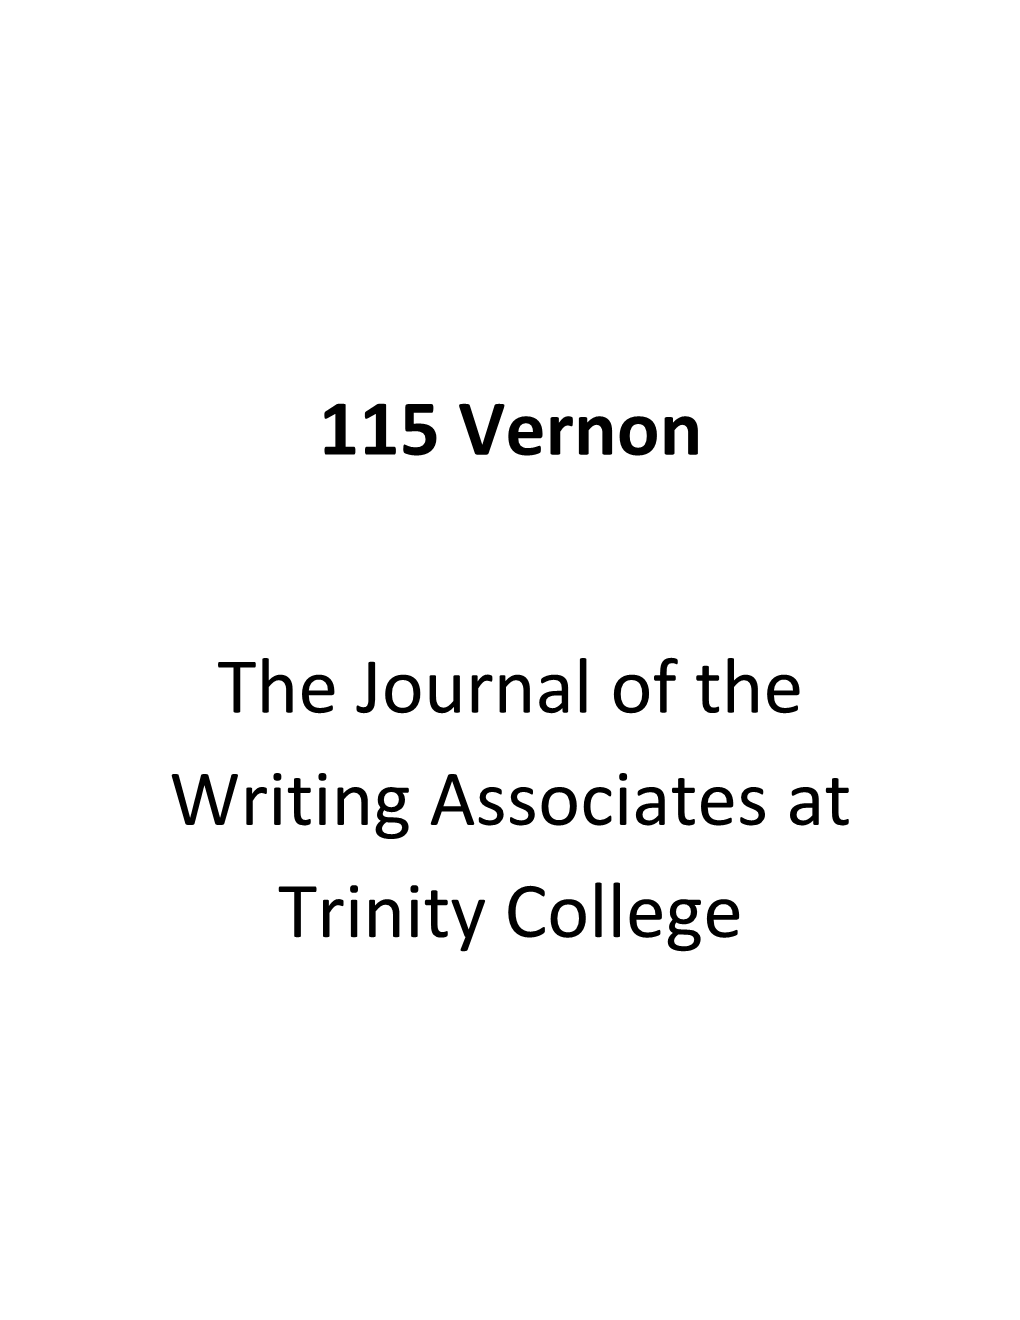 The Journal of the Writingassociates at Trinity College